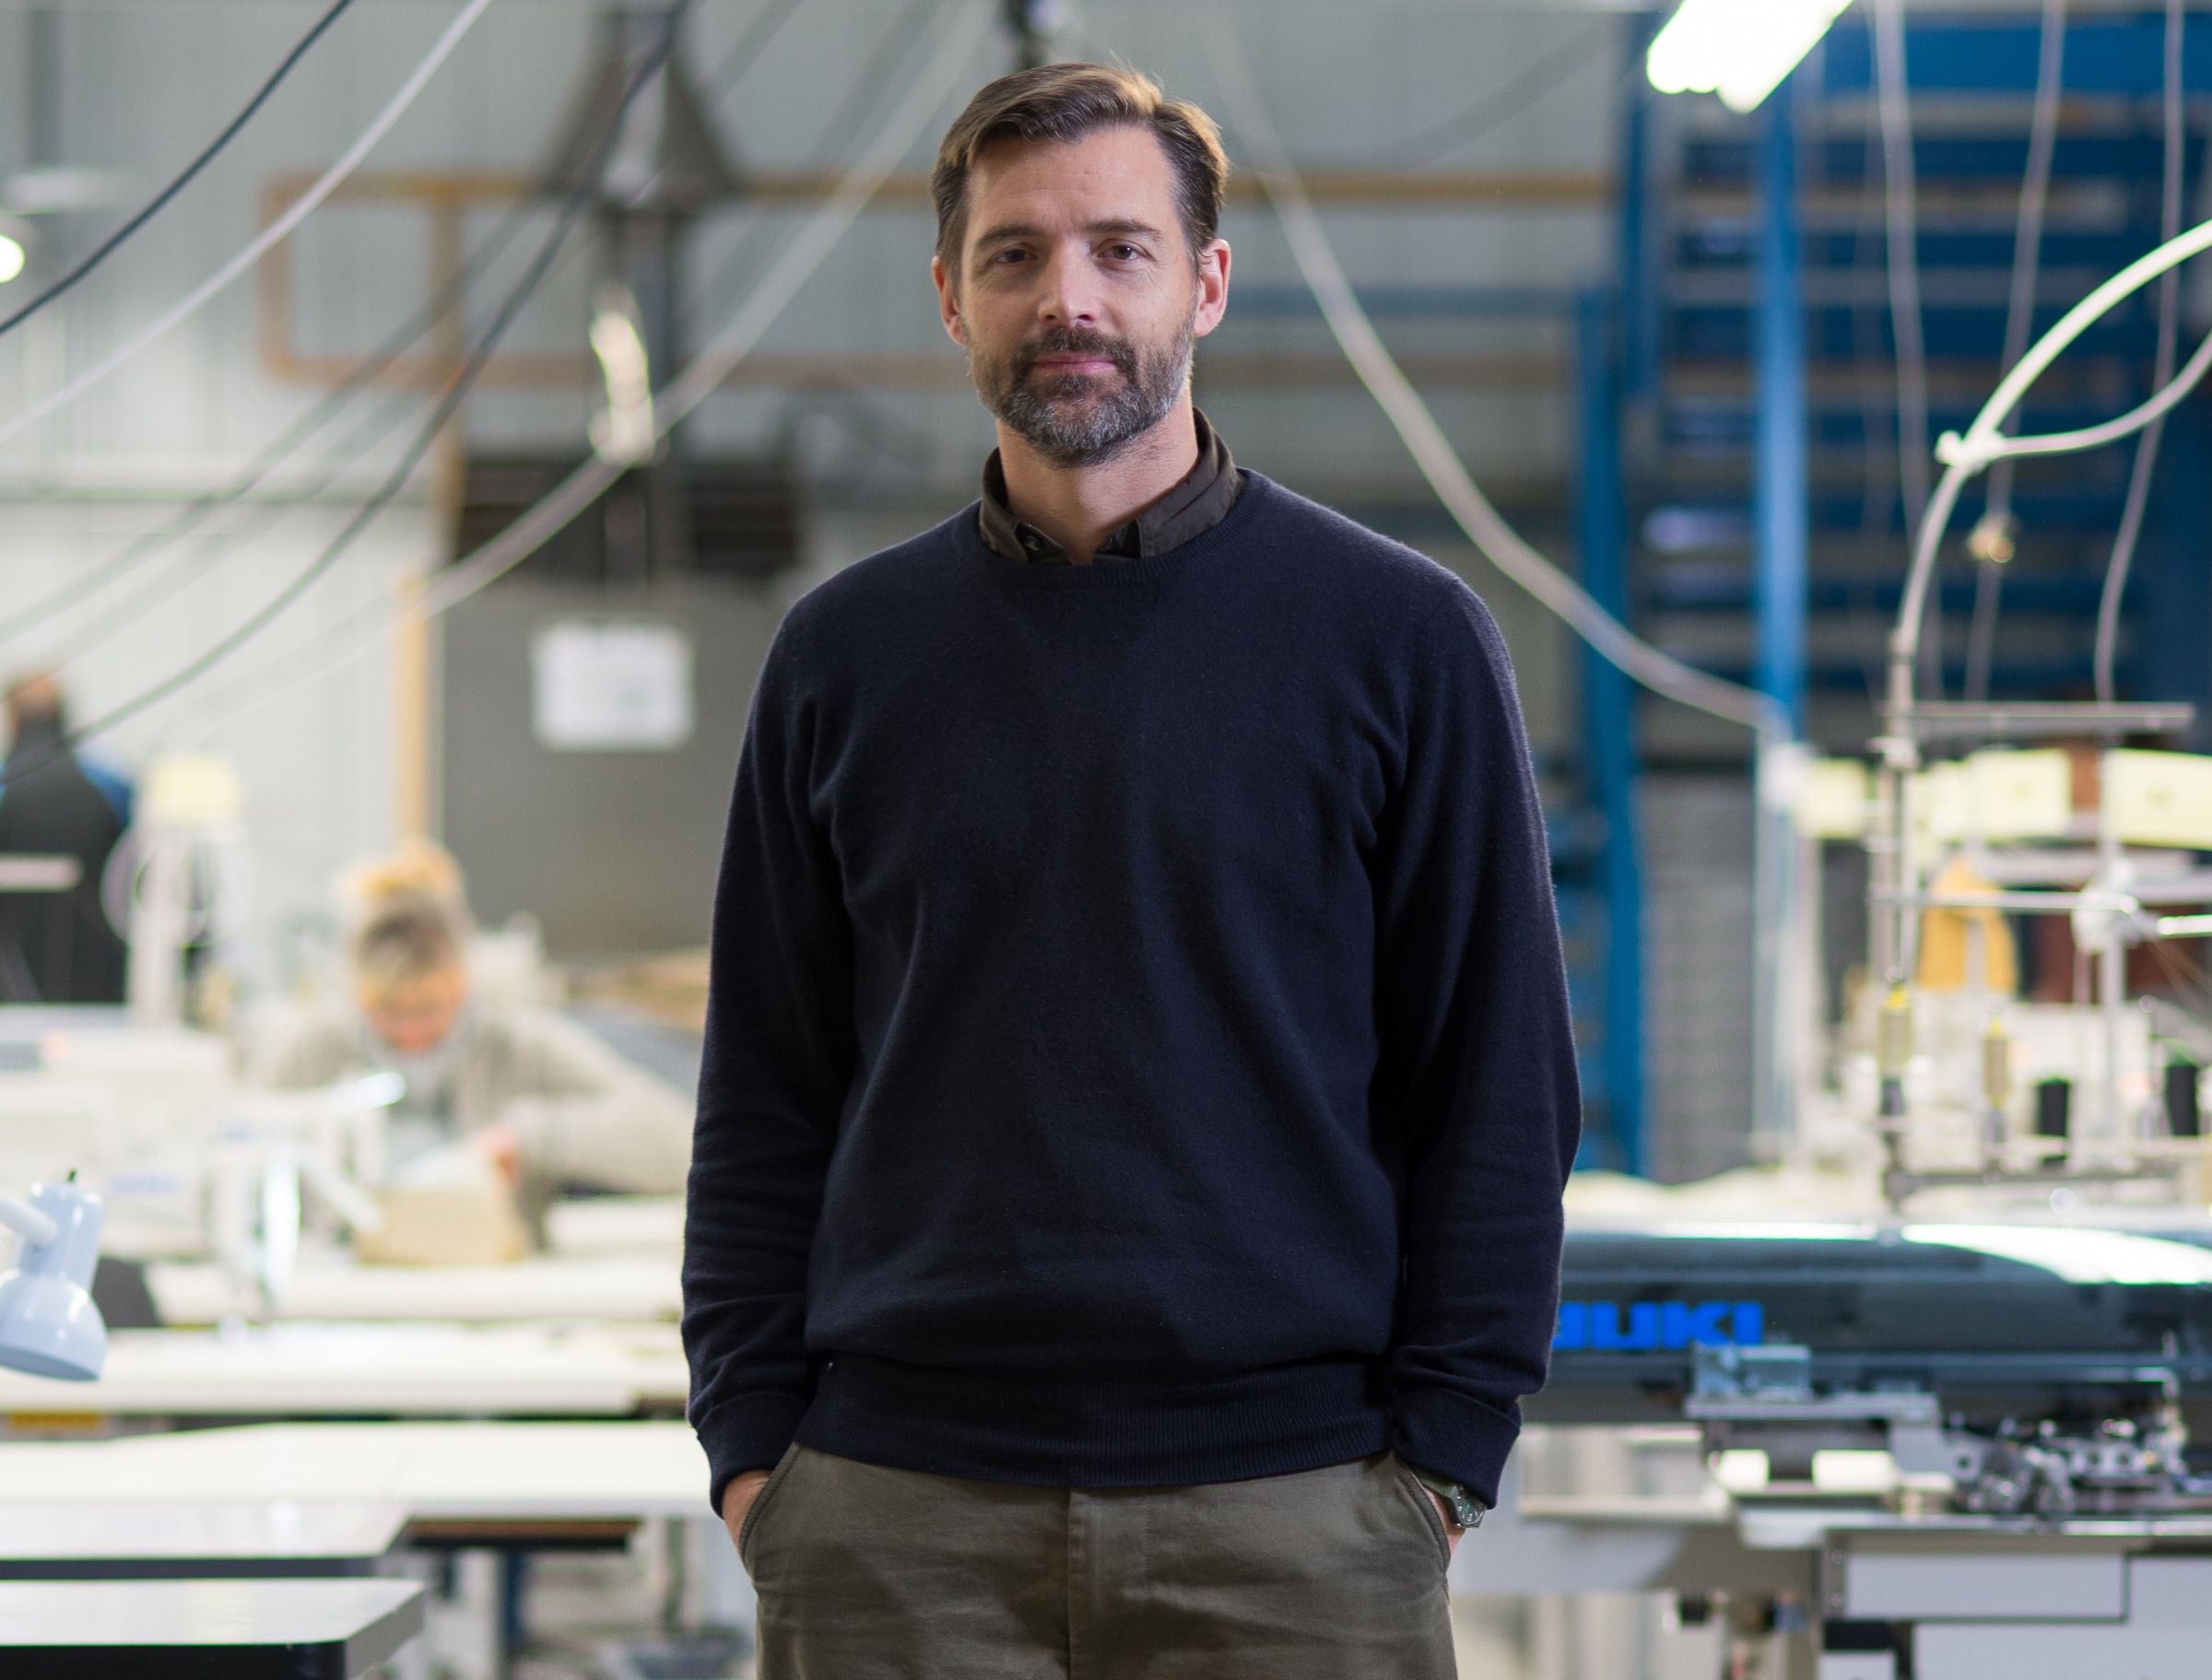 In conversation with Patrick Grant